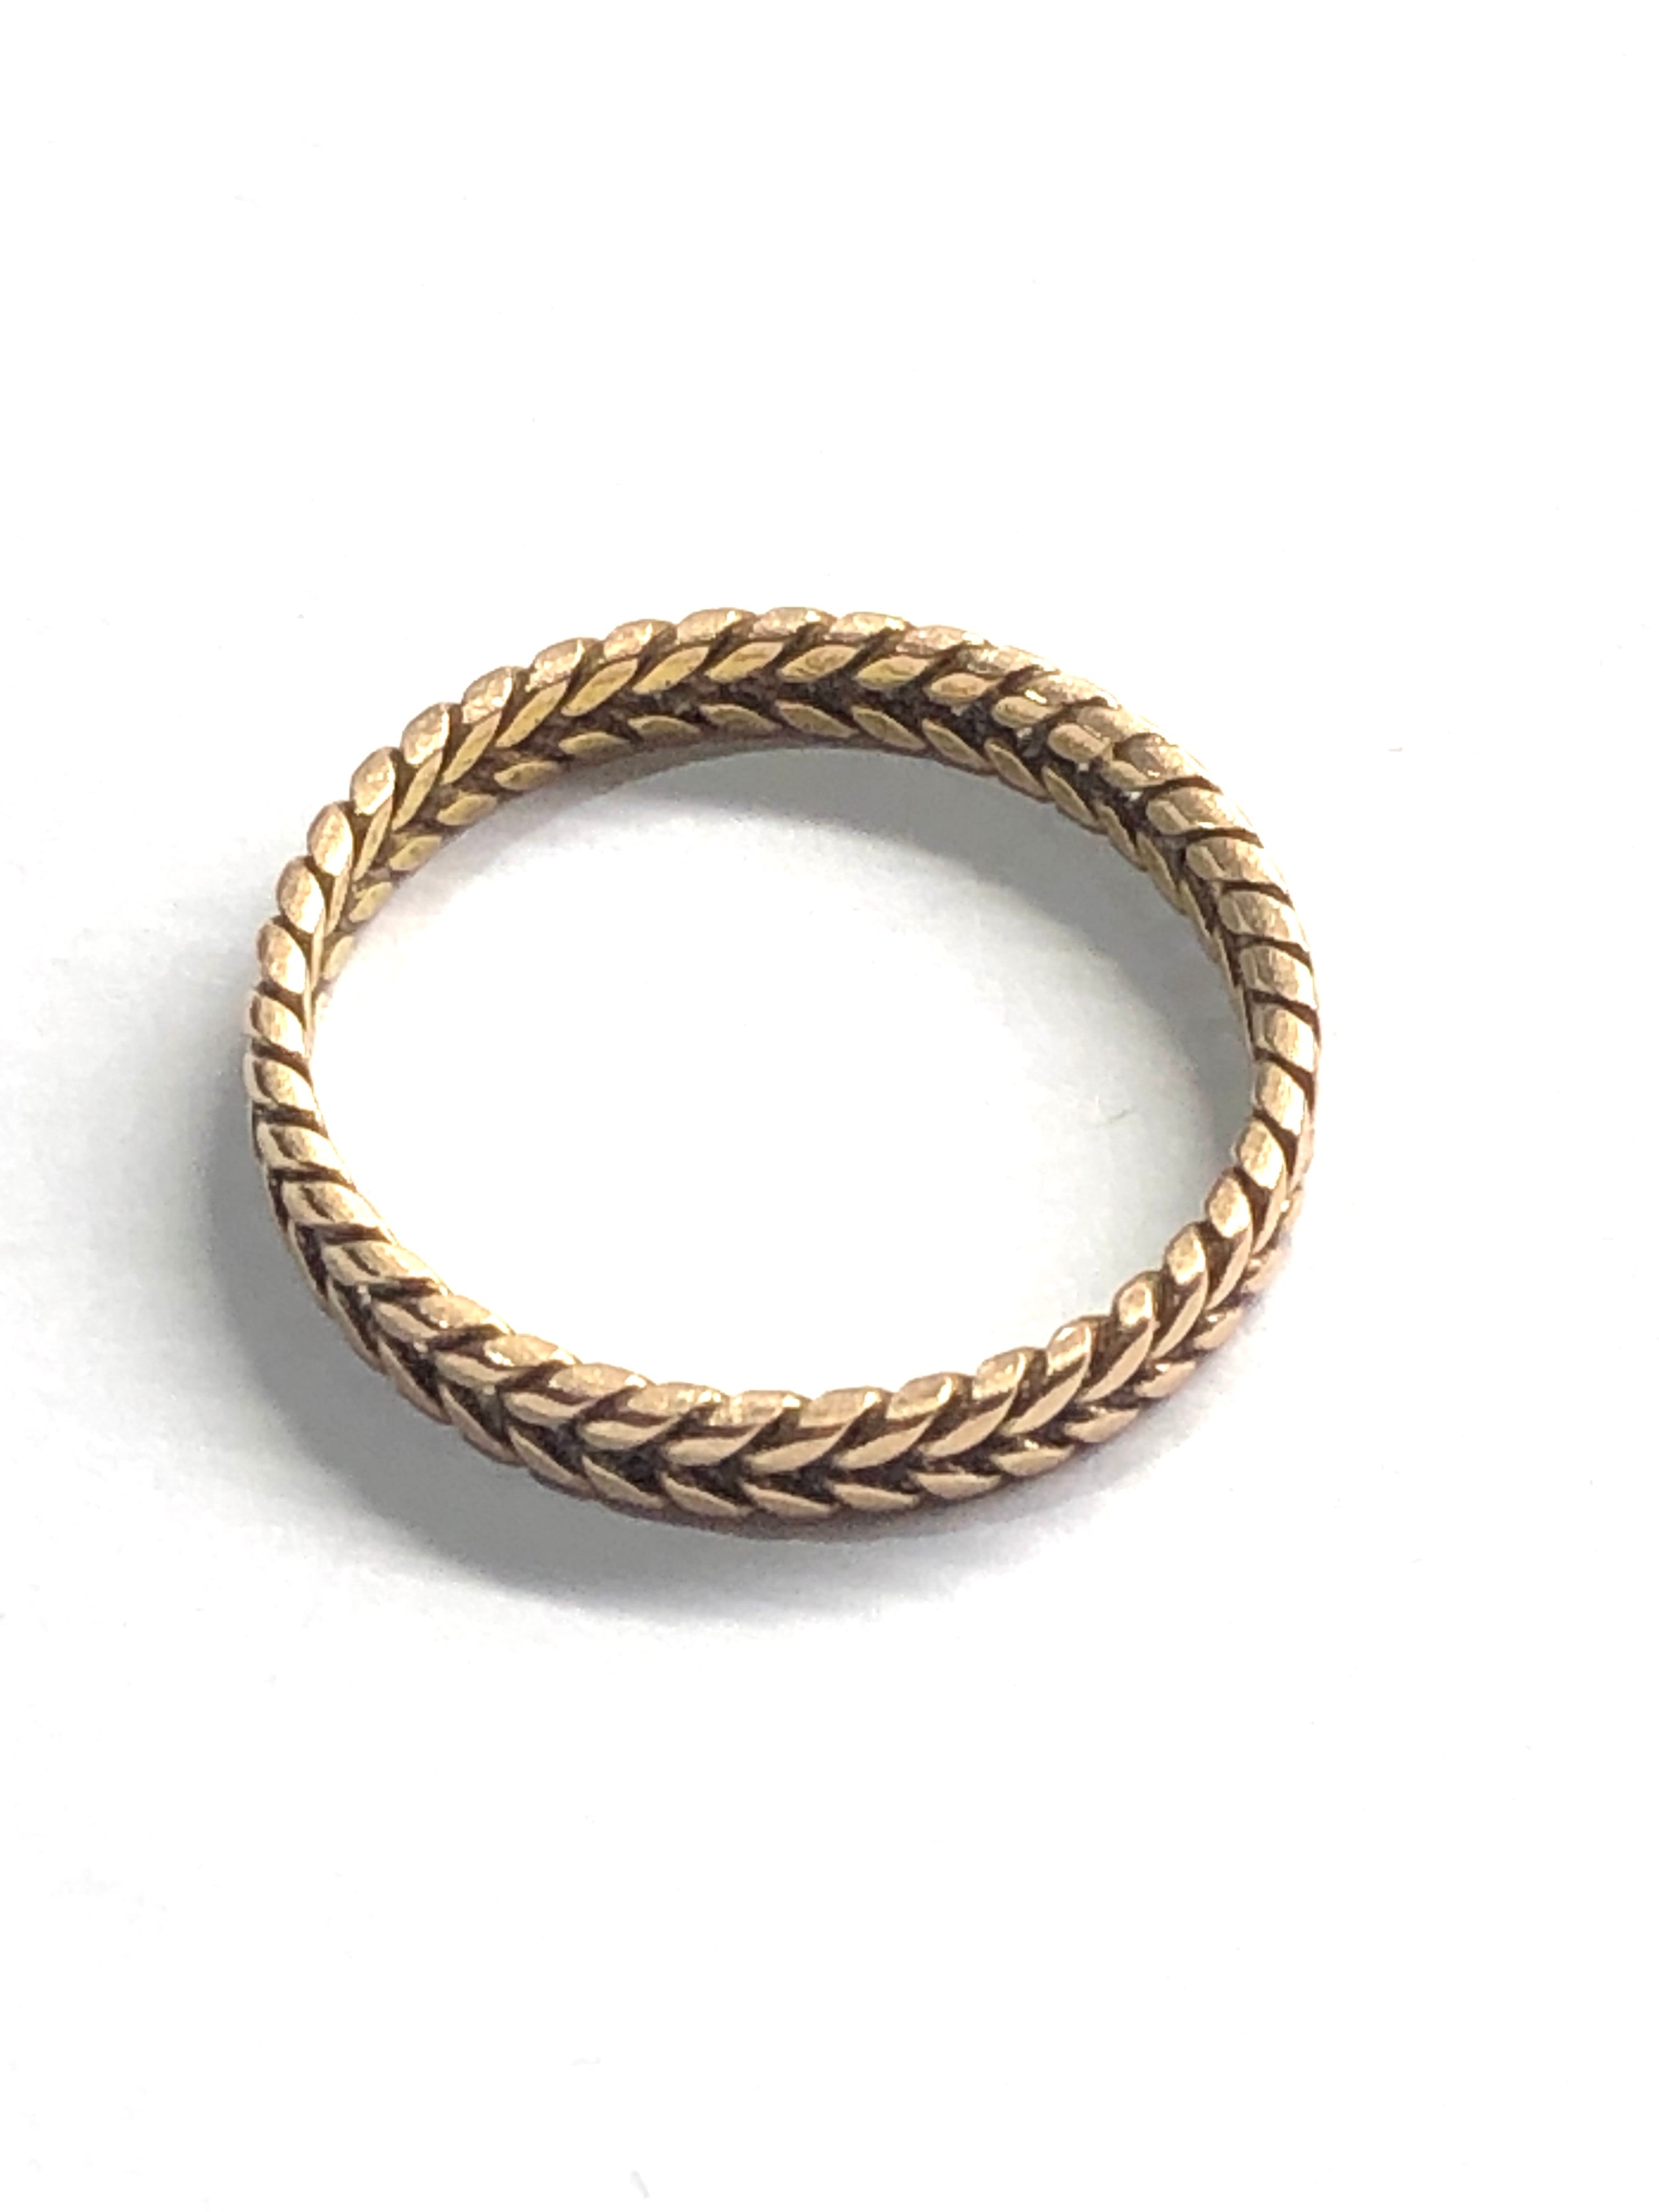 14ct gold vintage braided pattern band ring (1.6g) - Image 2 of 3